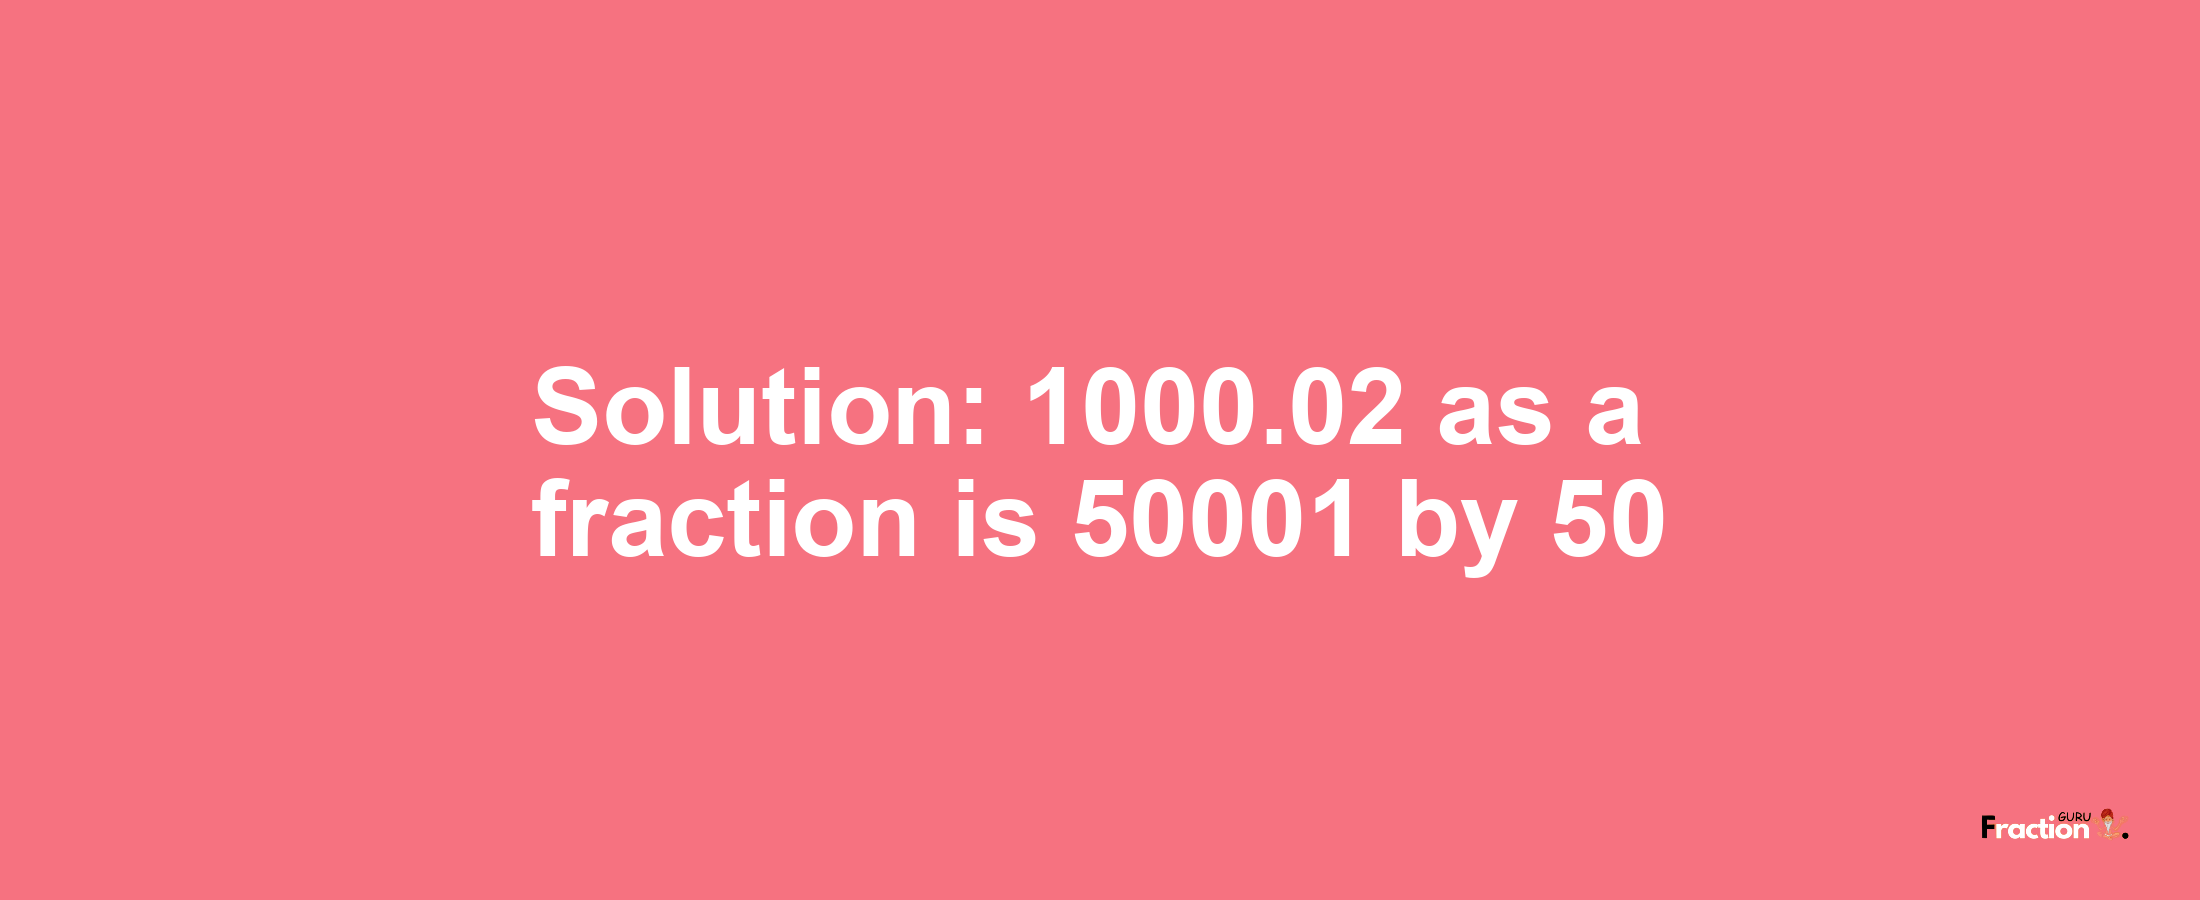 Solution:1000.02 as a fraction is 50001/50